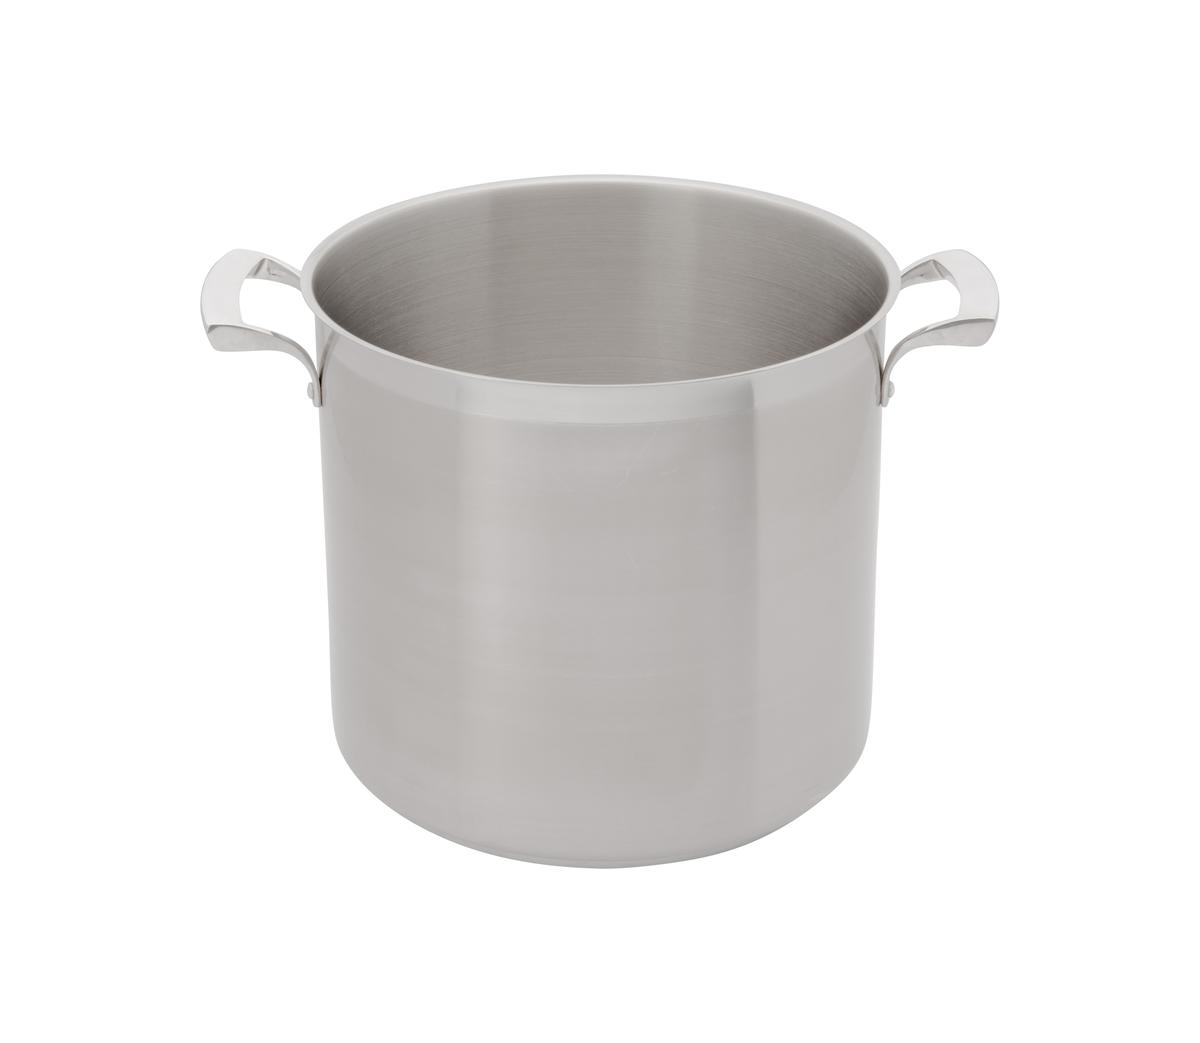 Thermalloy Stainless Steel 16QT Deep Stock Pot - 5723916